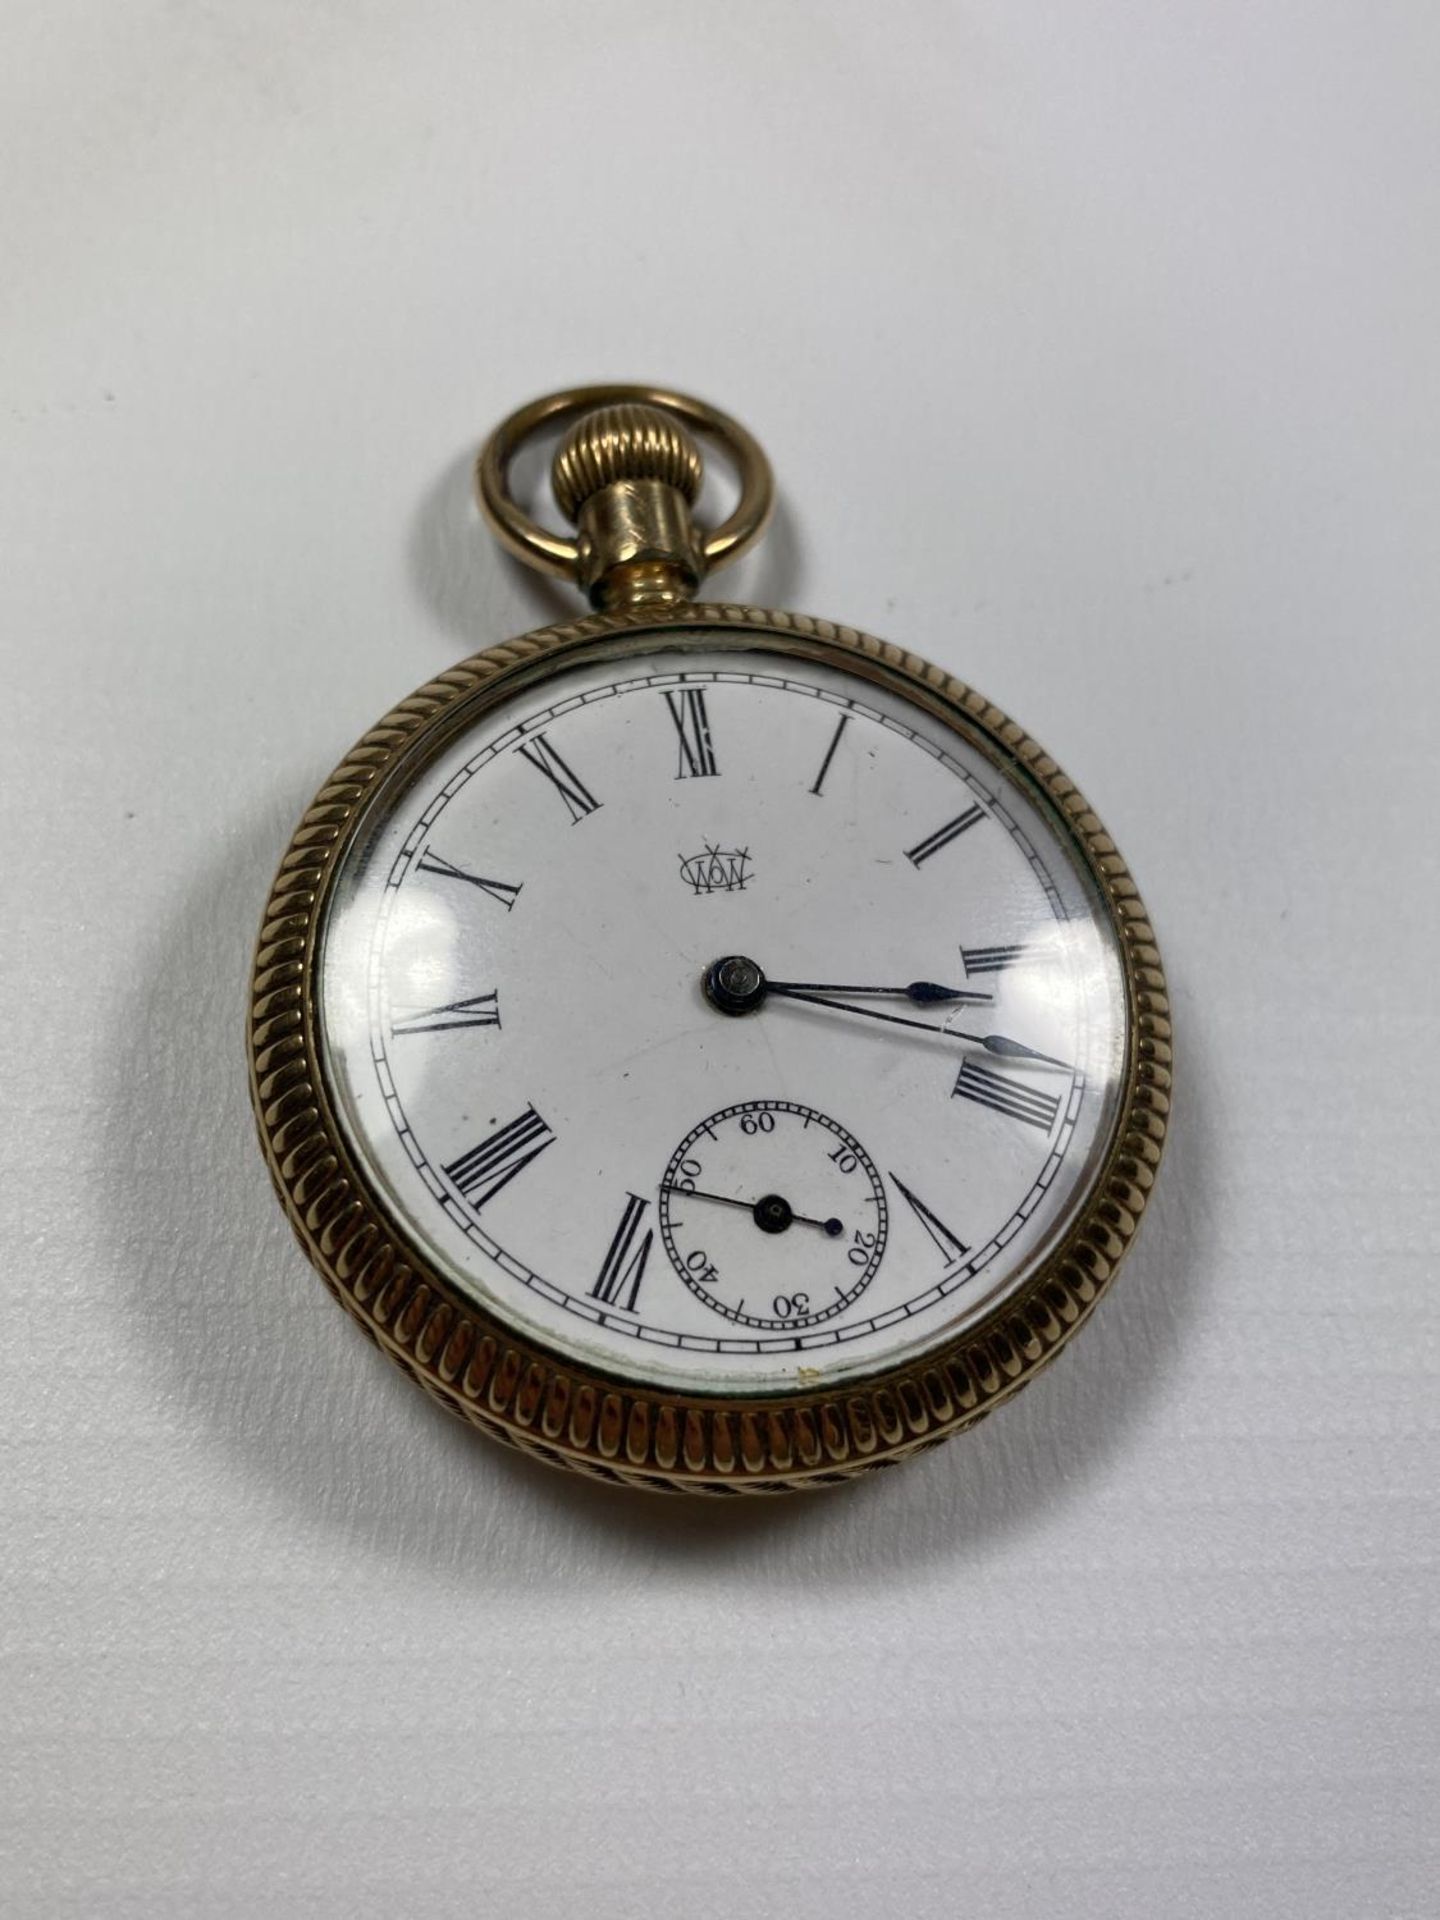 A VINTAGE GOLD PLATED U.S.A OPEN FACED POCKET WATCH, SIGNED TO MOVEMENT, NUMBERED 802611